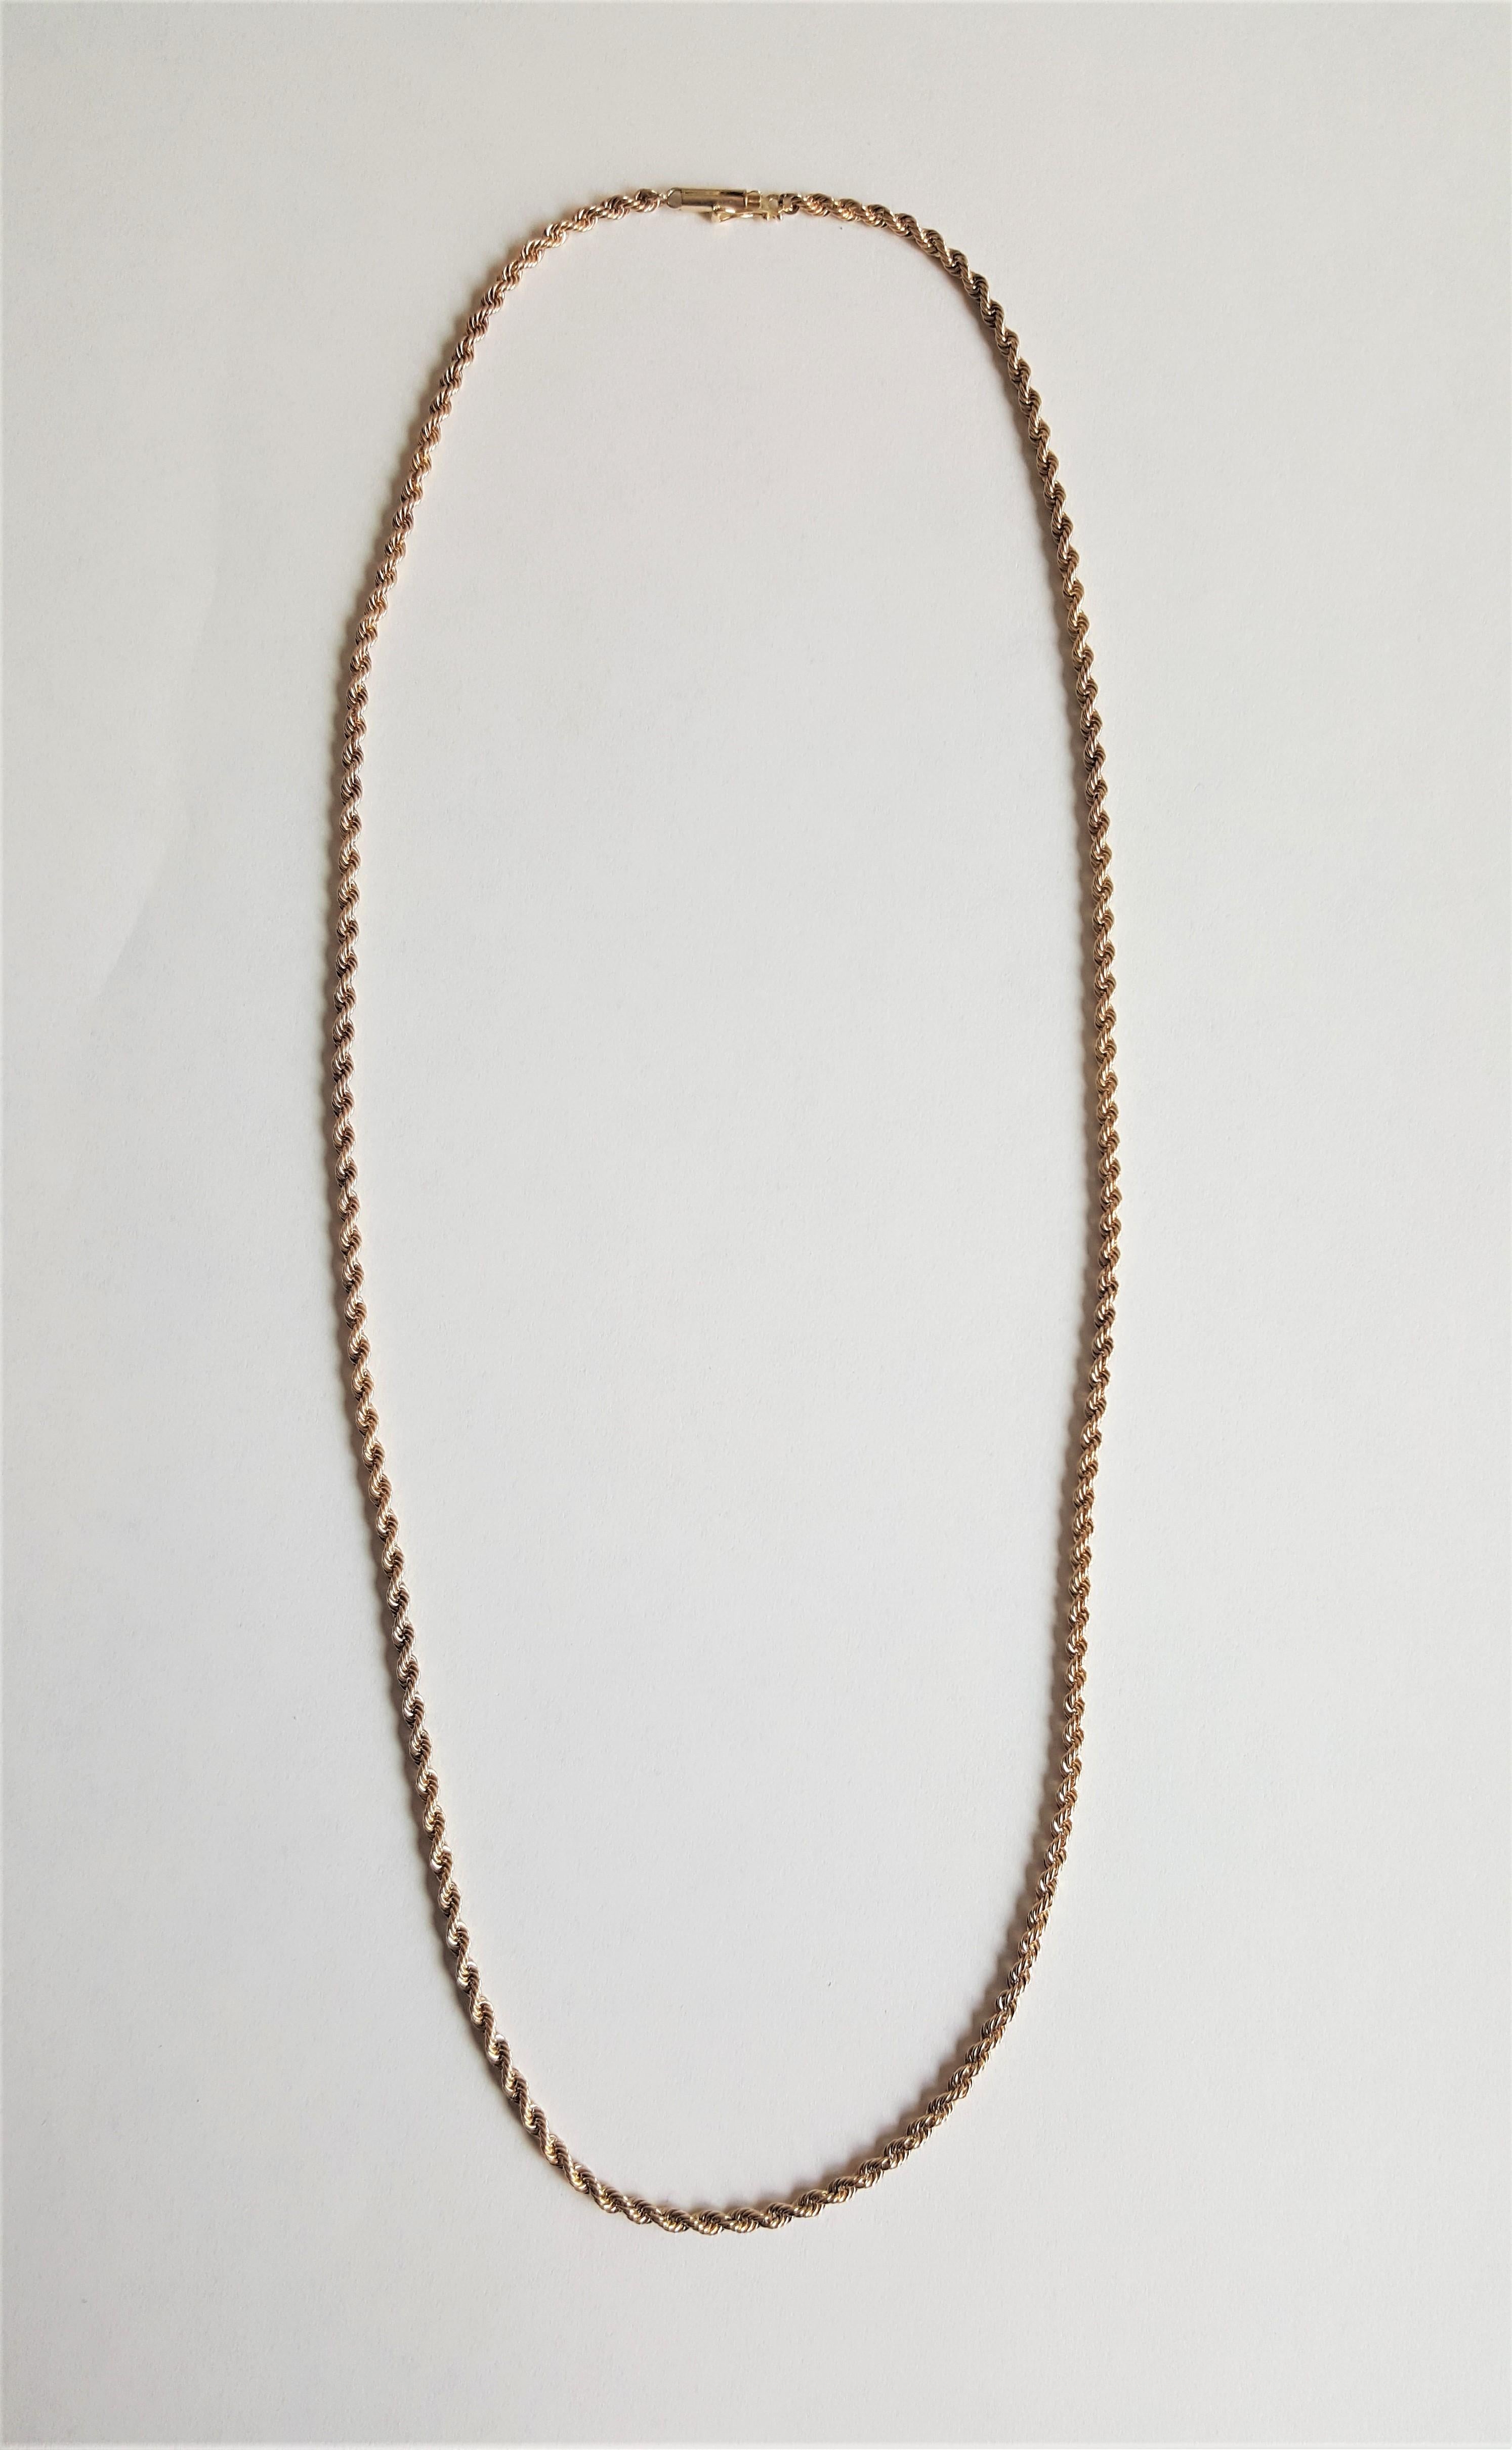 14kt yellow gold rope chain that is 24 inches long, secured with a barrel clasp and safety chain. The chain is in very good condition, 1.3mm in width, and weighs 18.3 grams. This is a great versatile chain. Please let us know if you have any